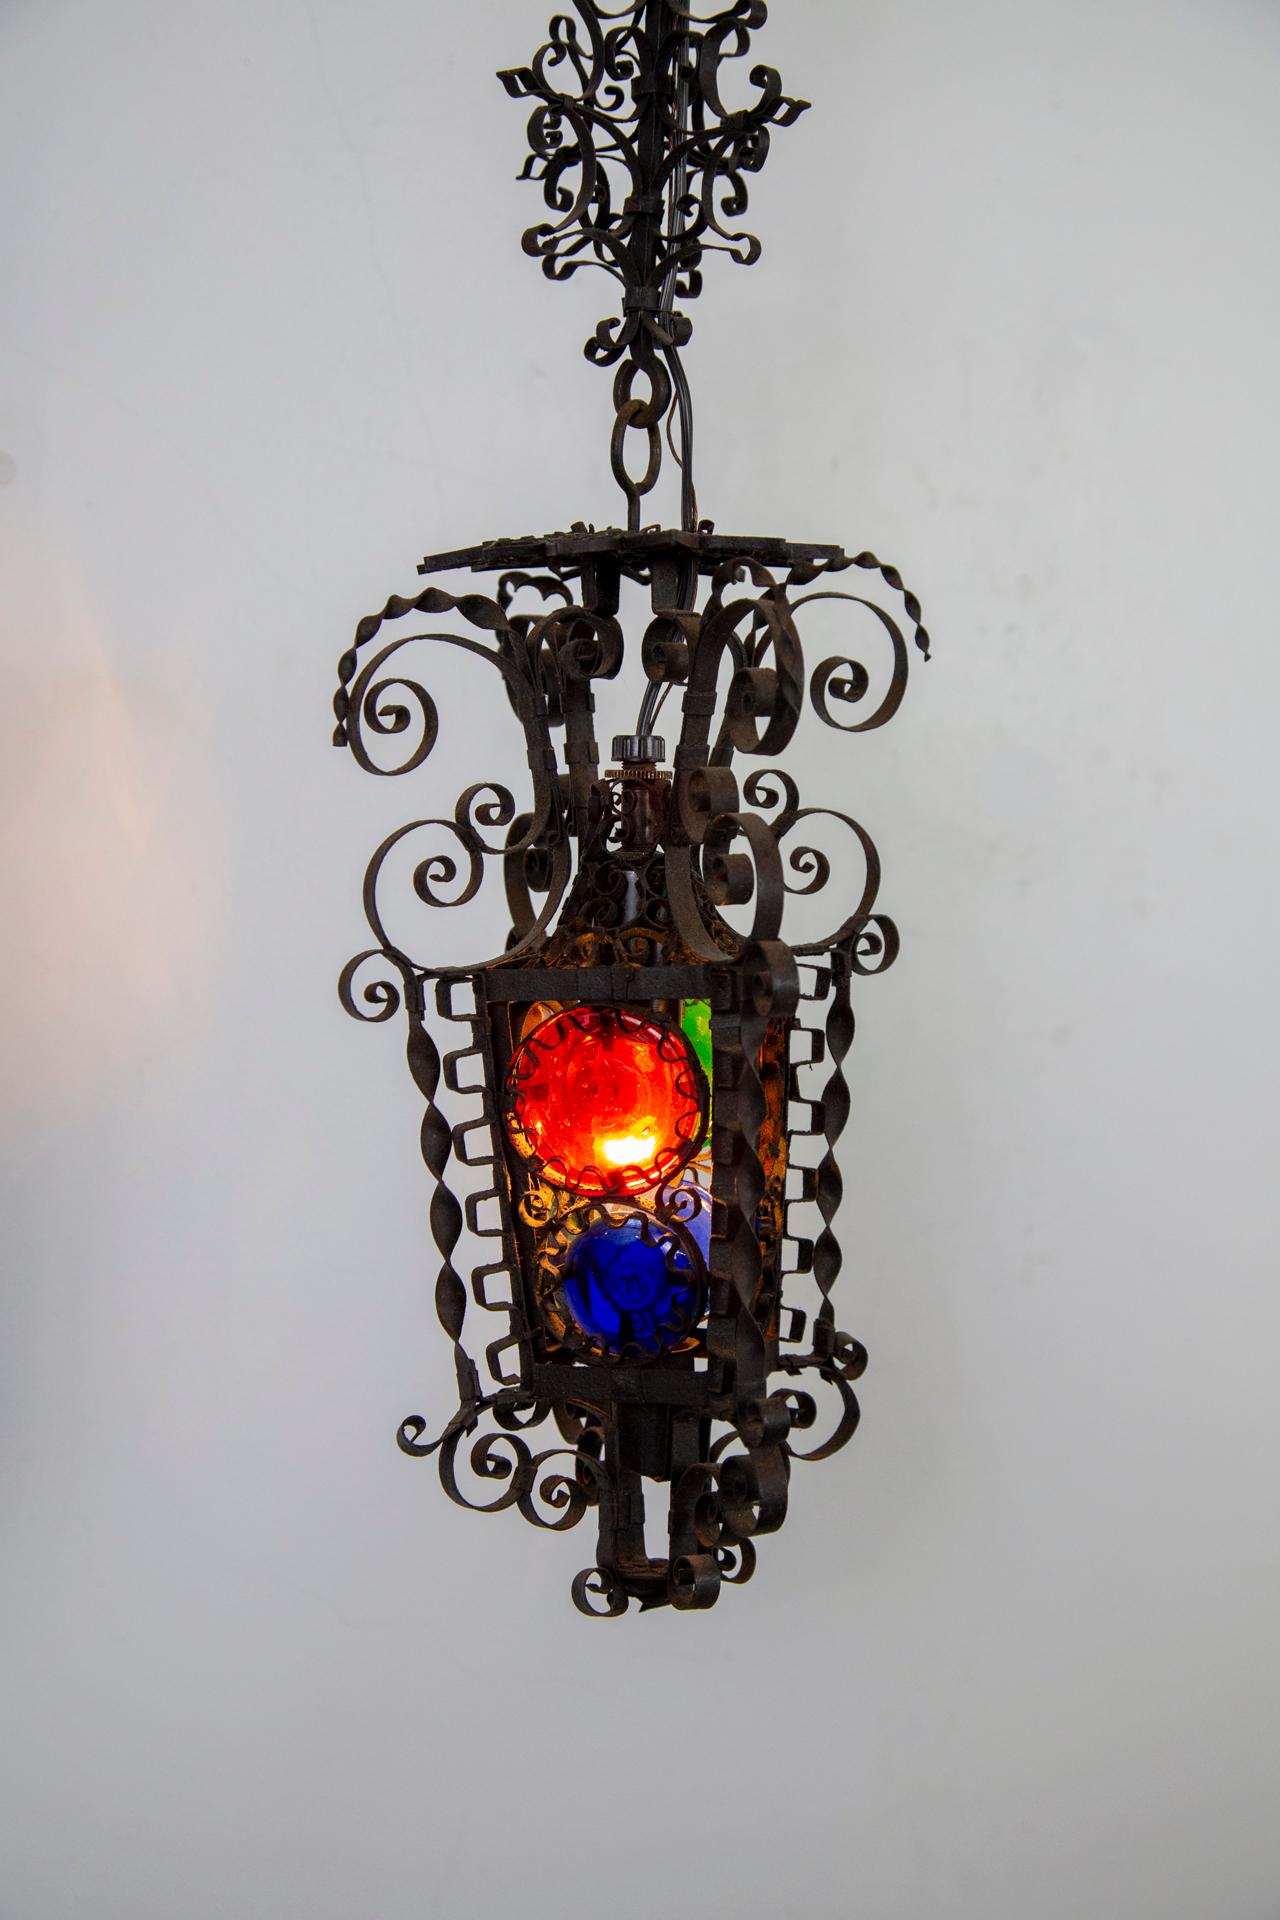 19th Century Black Filigree Iron Hanging Wall Lantern W/ Colored Glass For Sale 4